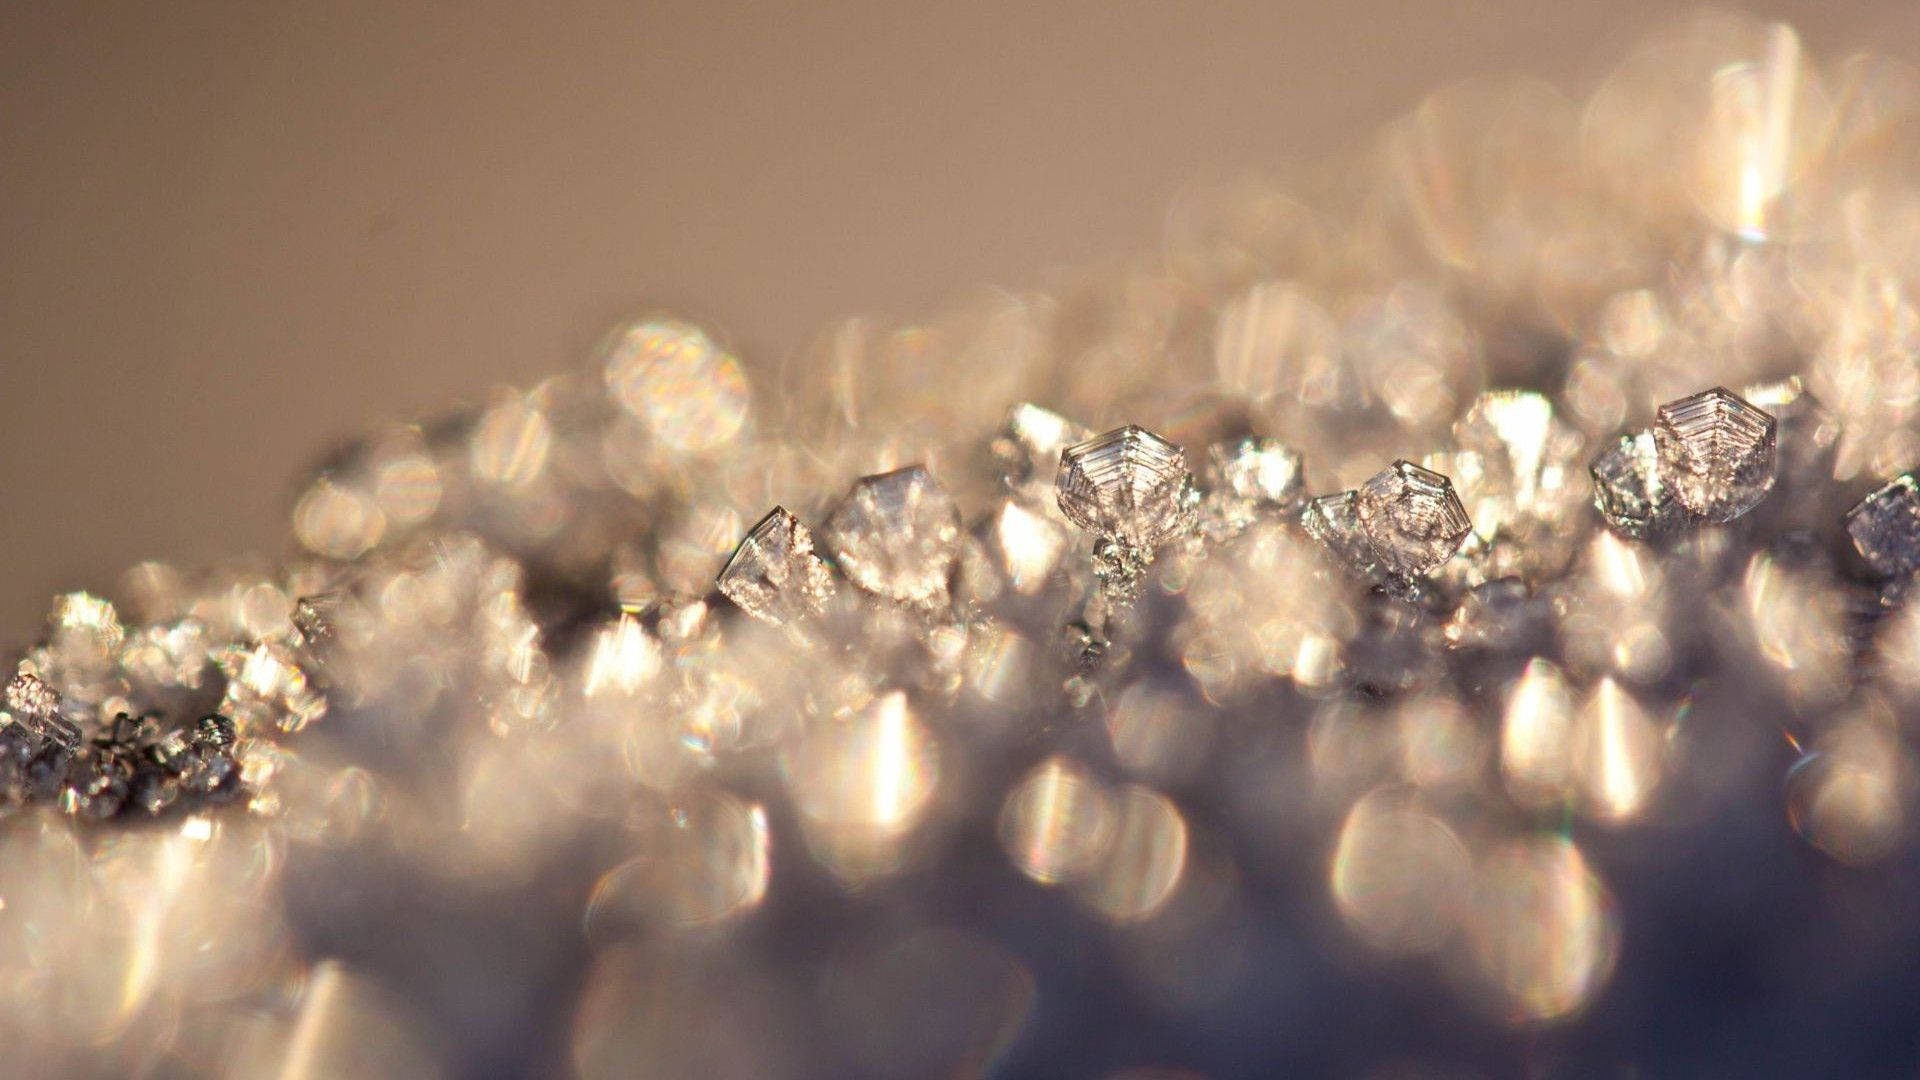 Diamond 1920X1080 Wallpaper and Background Image